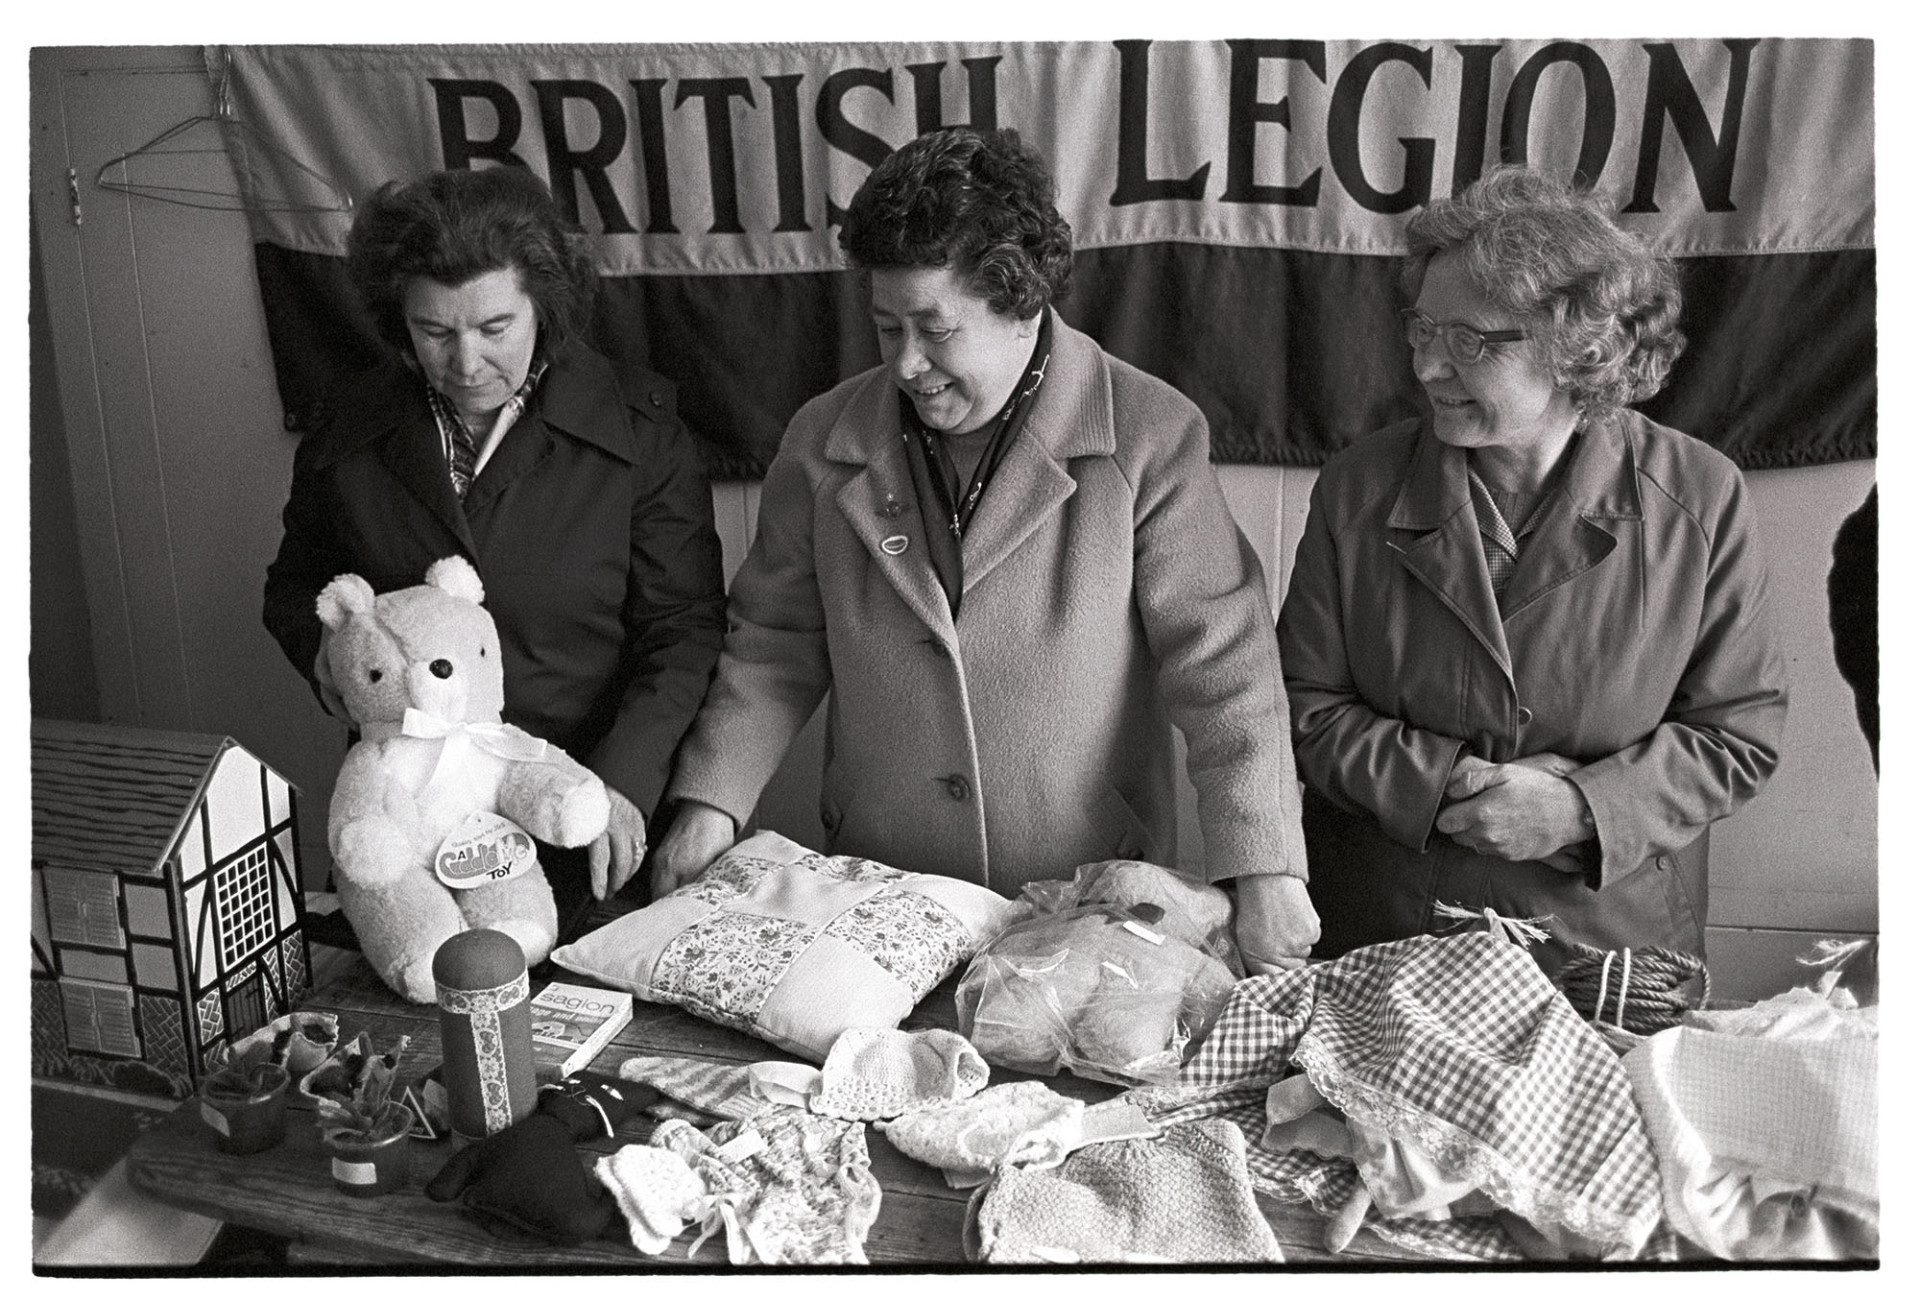 Women at British Legion stall in Pannier Market, toys.
[Three women at the British Legion stall in Barnstaple Pannier Market.  On the stall are soft toys, a dolls' house and soft furnishings.]